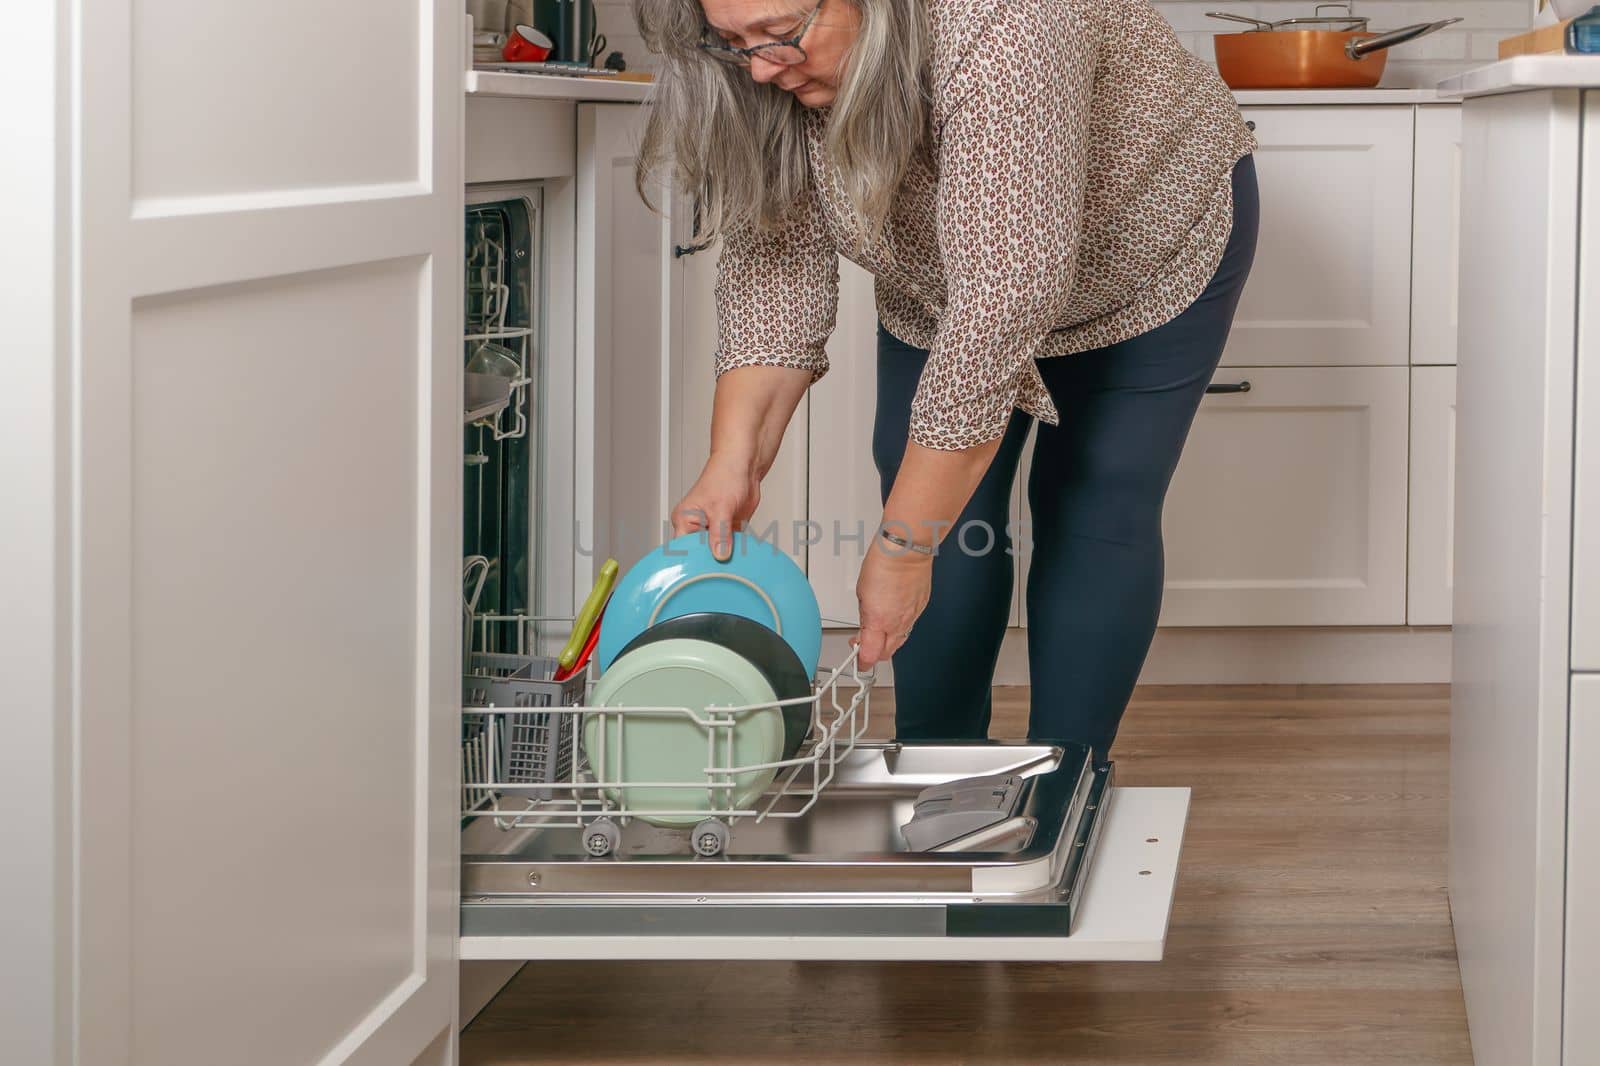 woman putting the dishes in the dishwasher by joseantona